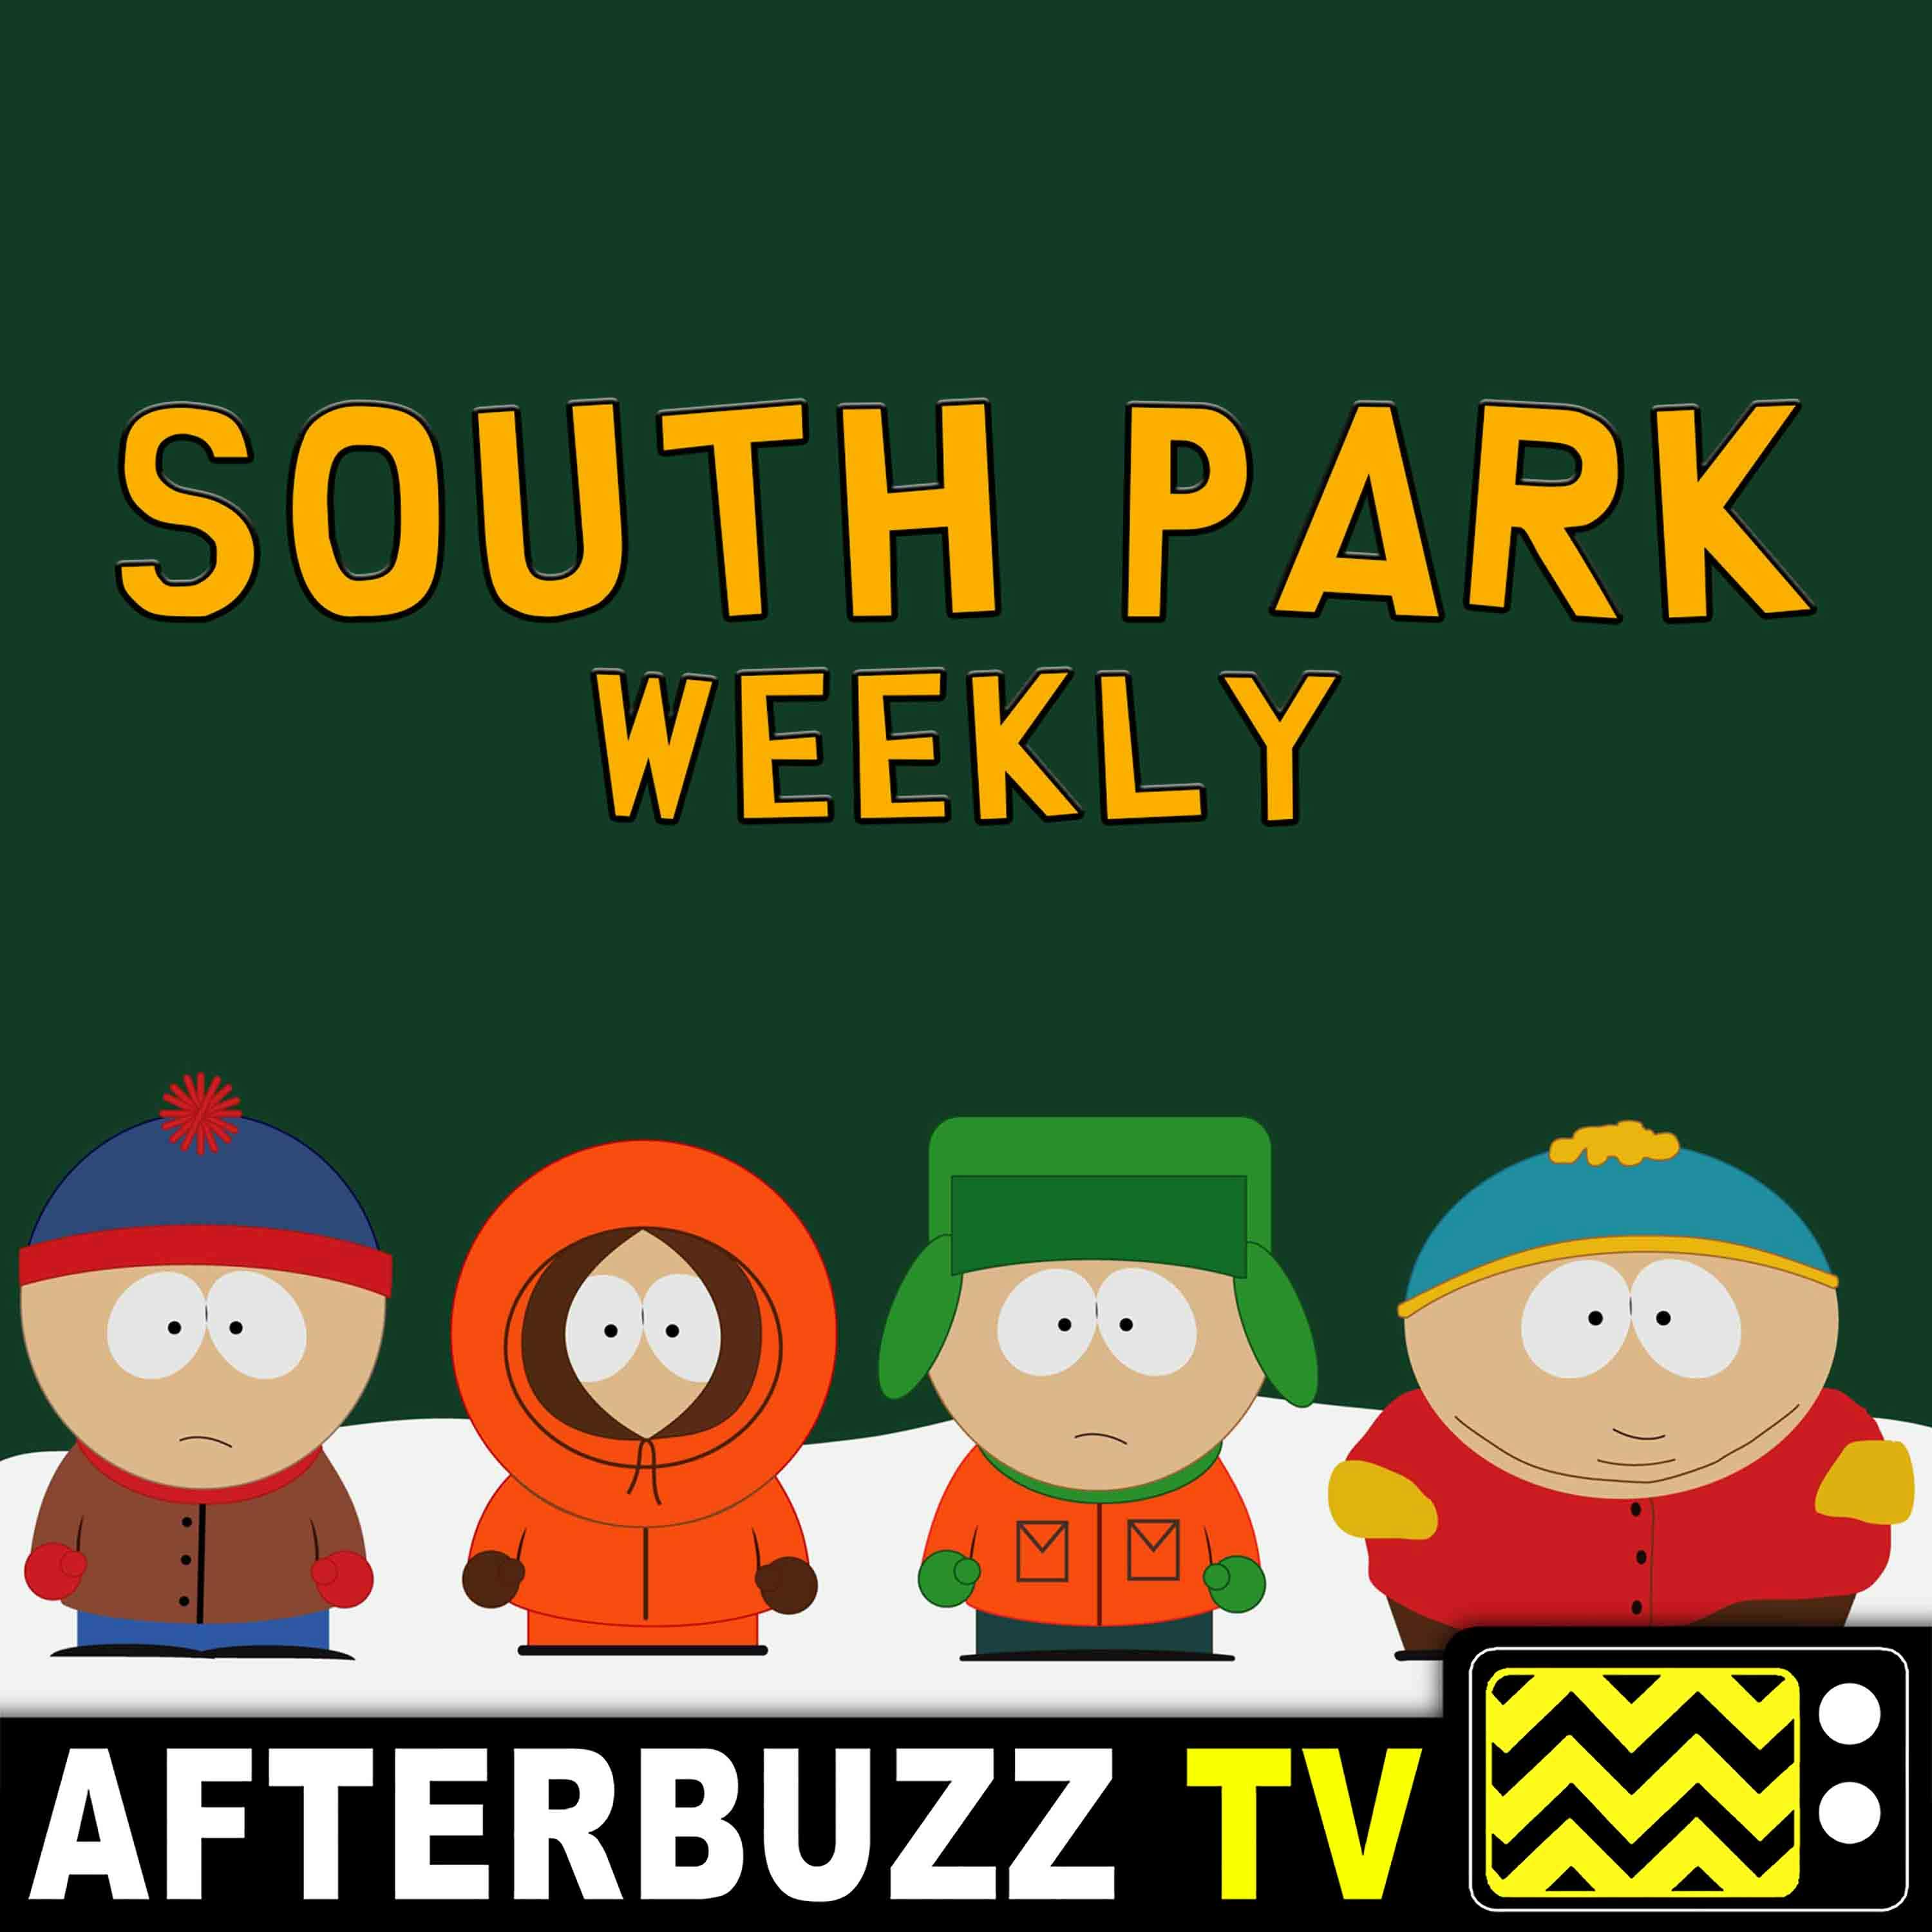 South Park S:19 | Where My Country Gone E:2 | AfterBuzz TV AfterShow